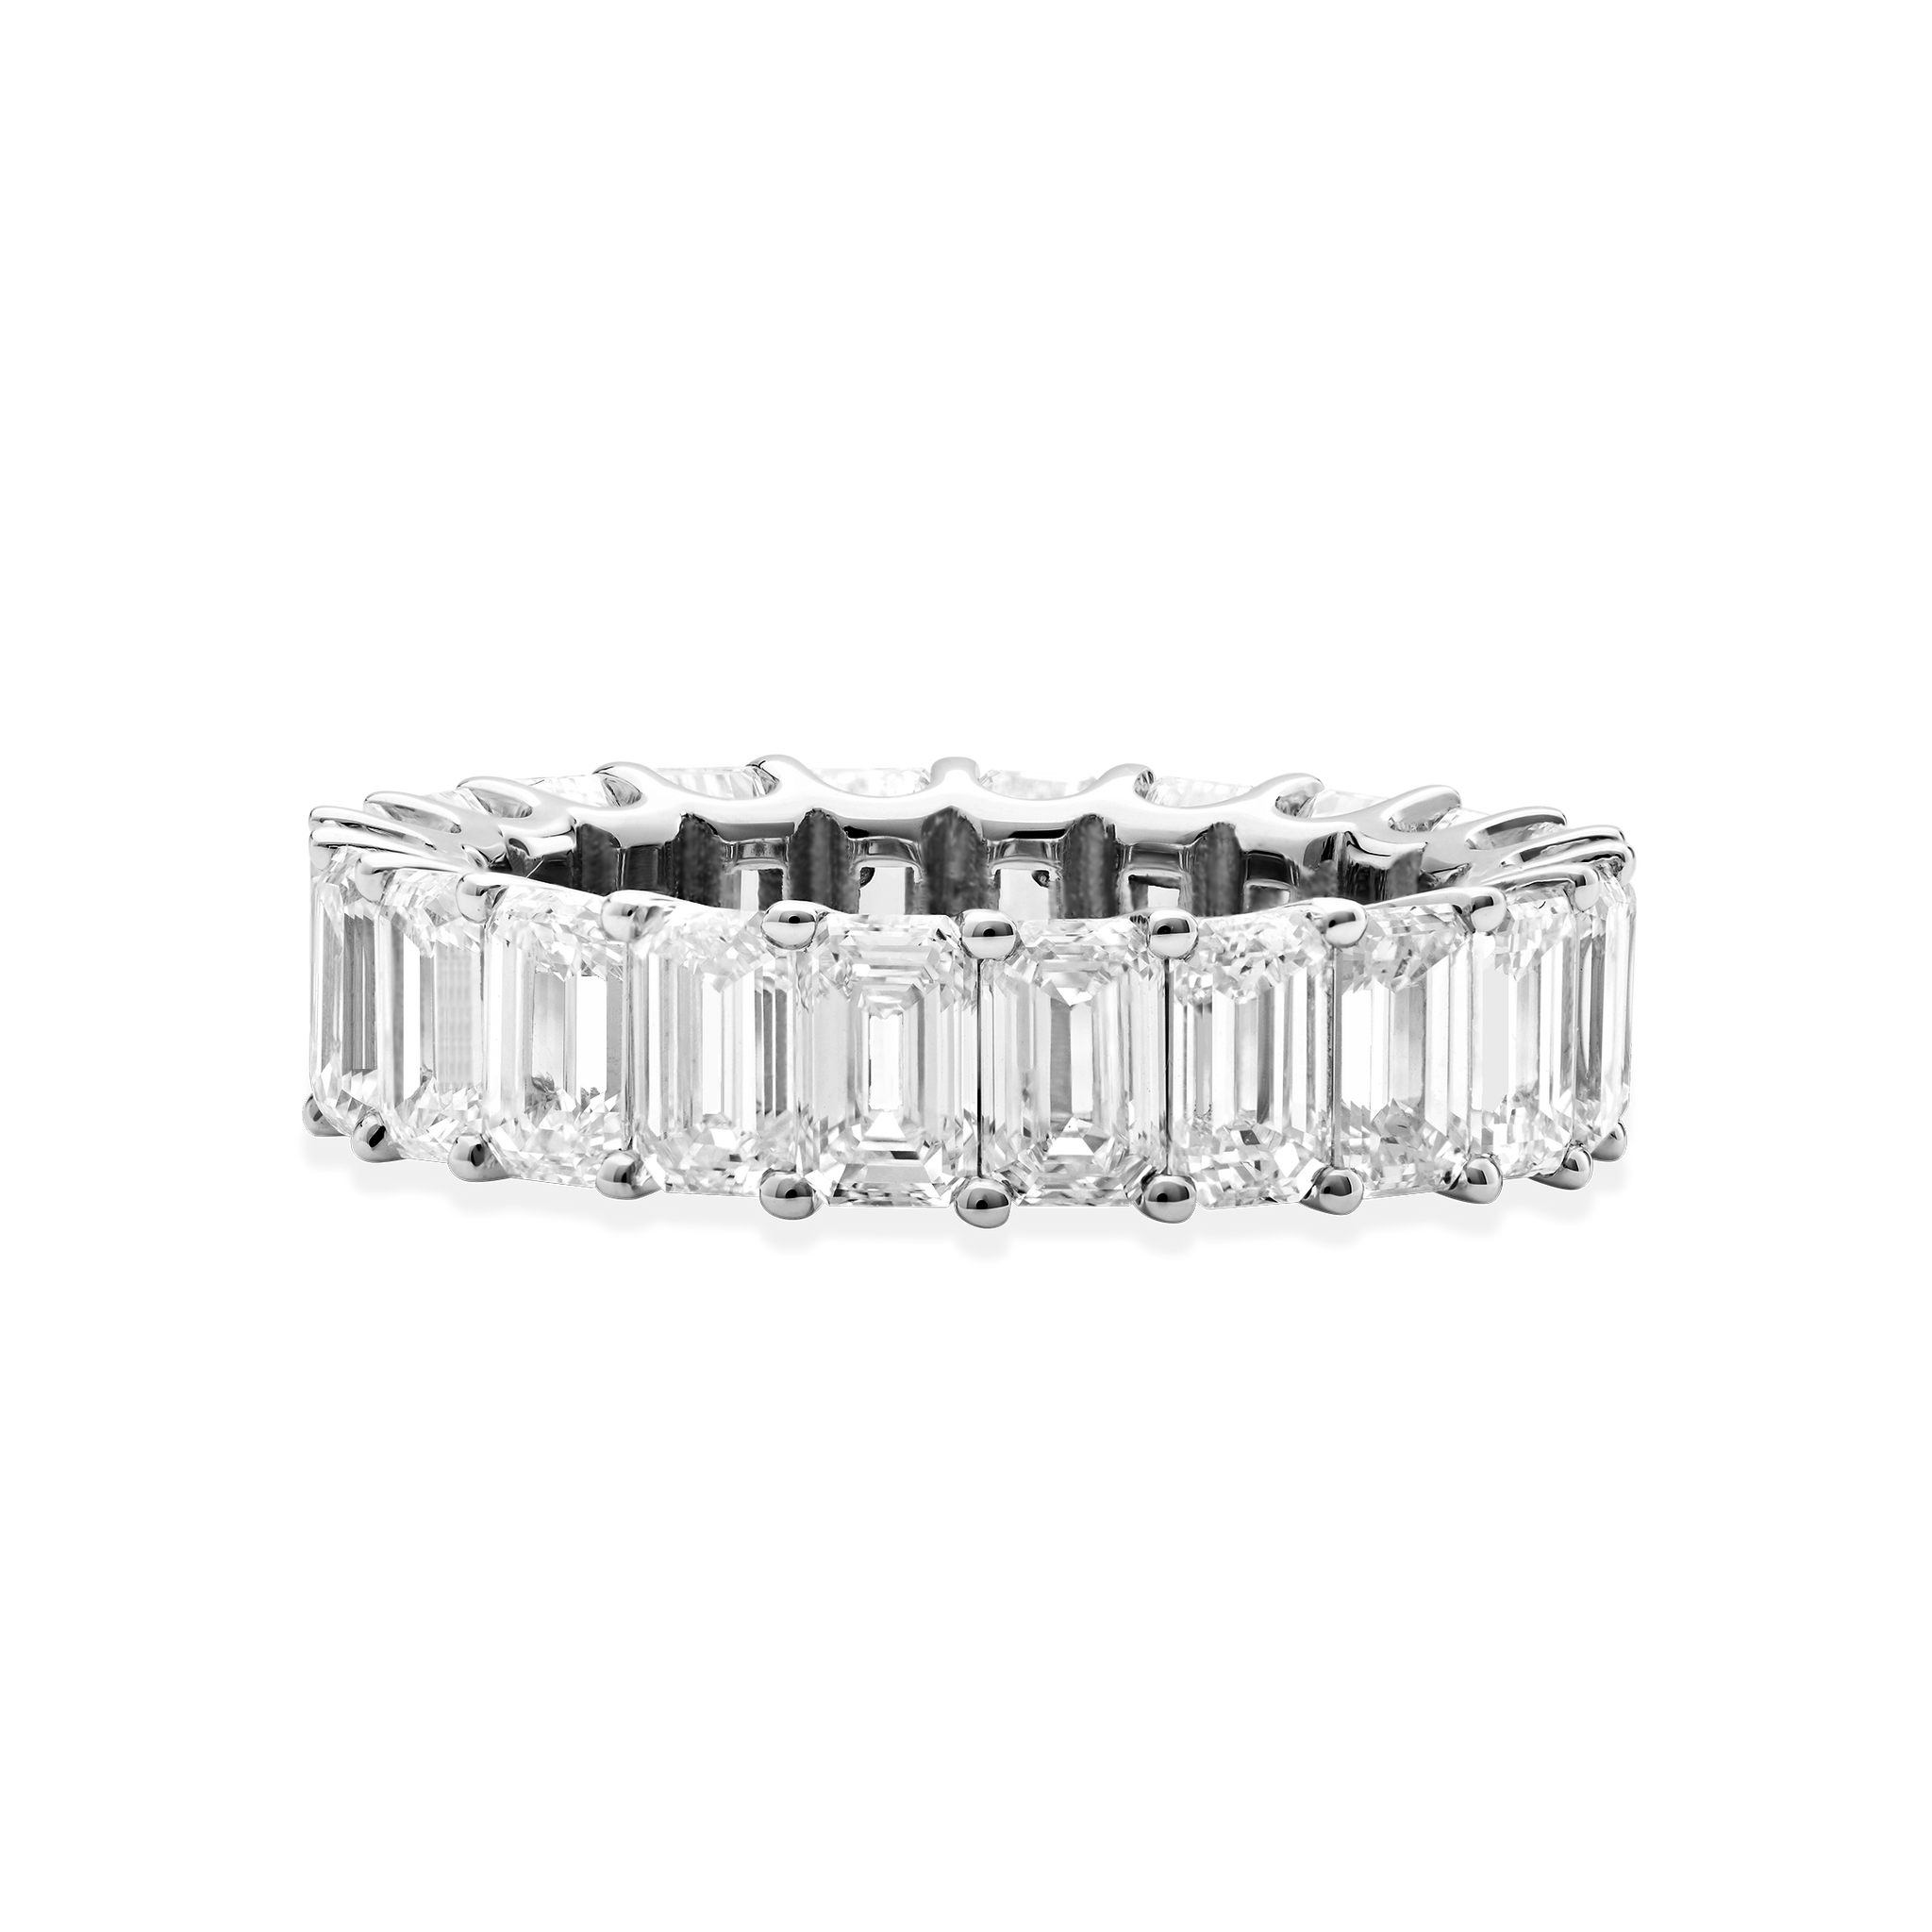 In this emerald diamond eternity band, D color Emerald diamonds are set precisely to radiate light from their infinite hall of mirrors. Size and color are fully customizable. 7 total carat weight shown here in 18K White Gold and Palladium.